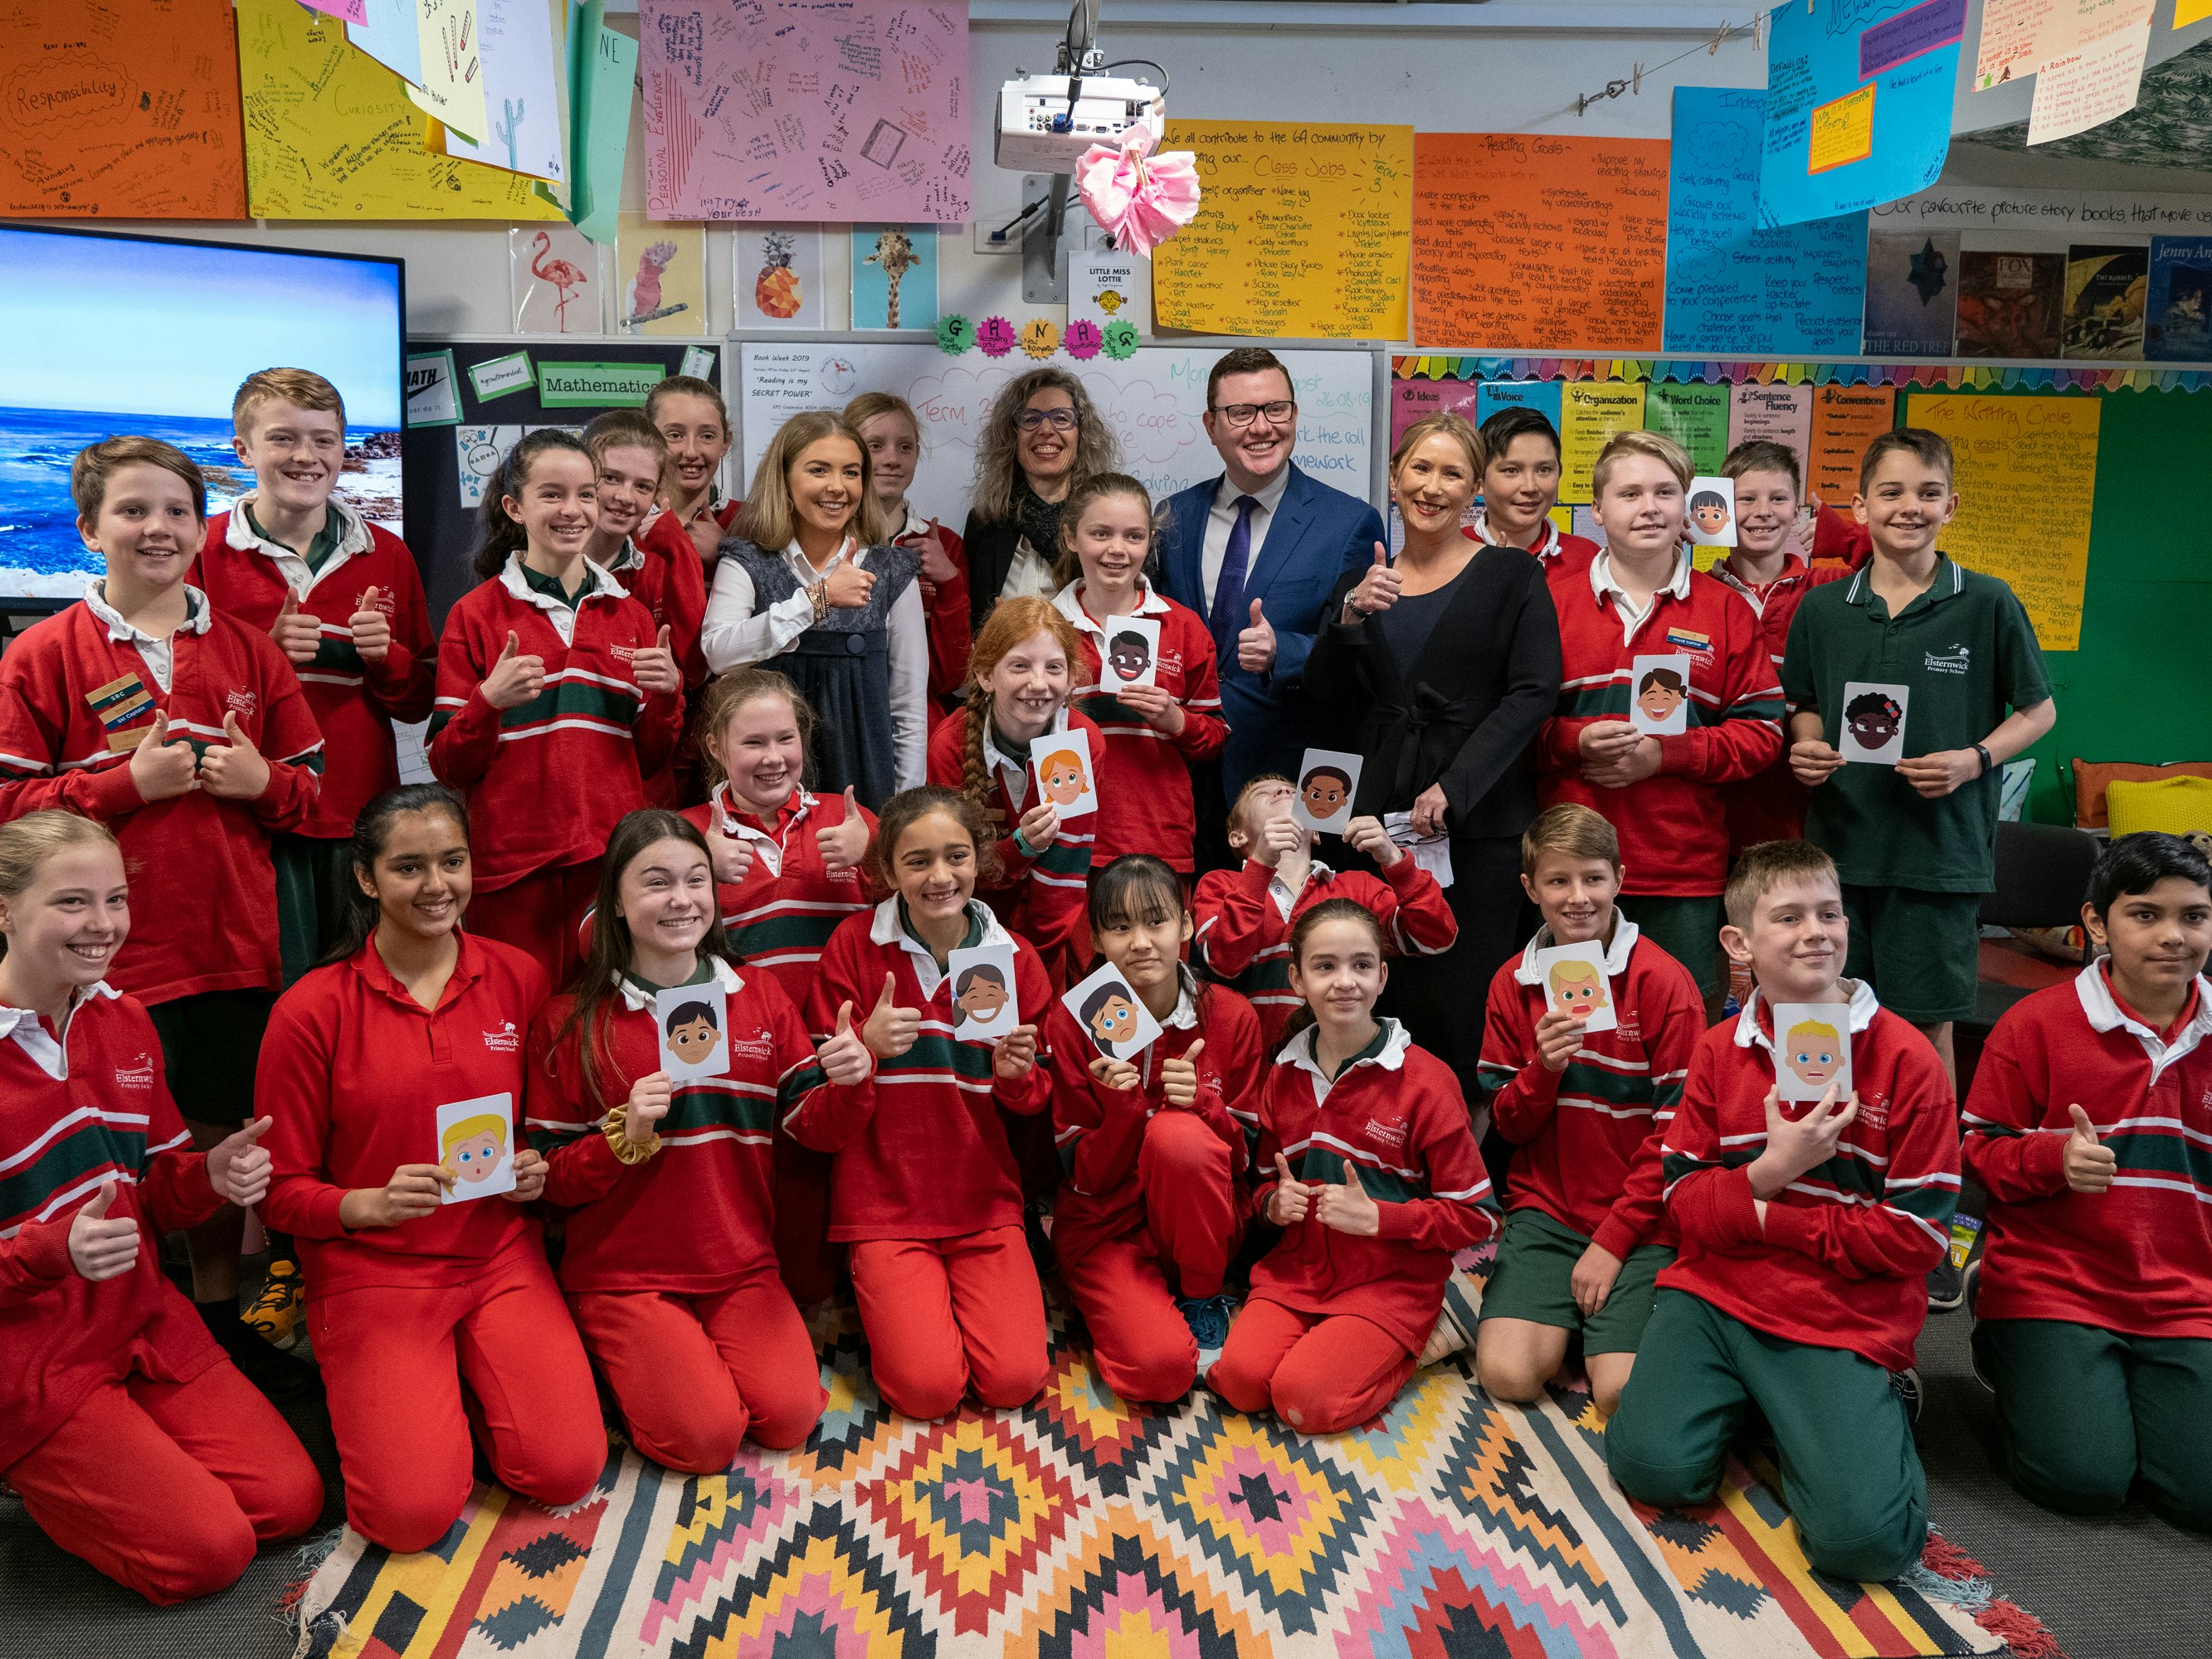 Teachers and students from Elsternwick Primary, Professor Nicole Reinhart and Mr Tim Richardson MP excited to launch AllPlay Learn for all public schools in Victoria [Source: Supplied]
